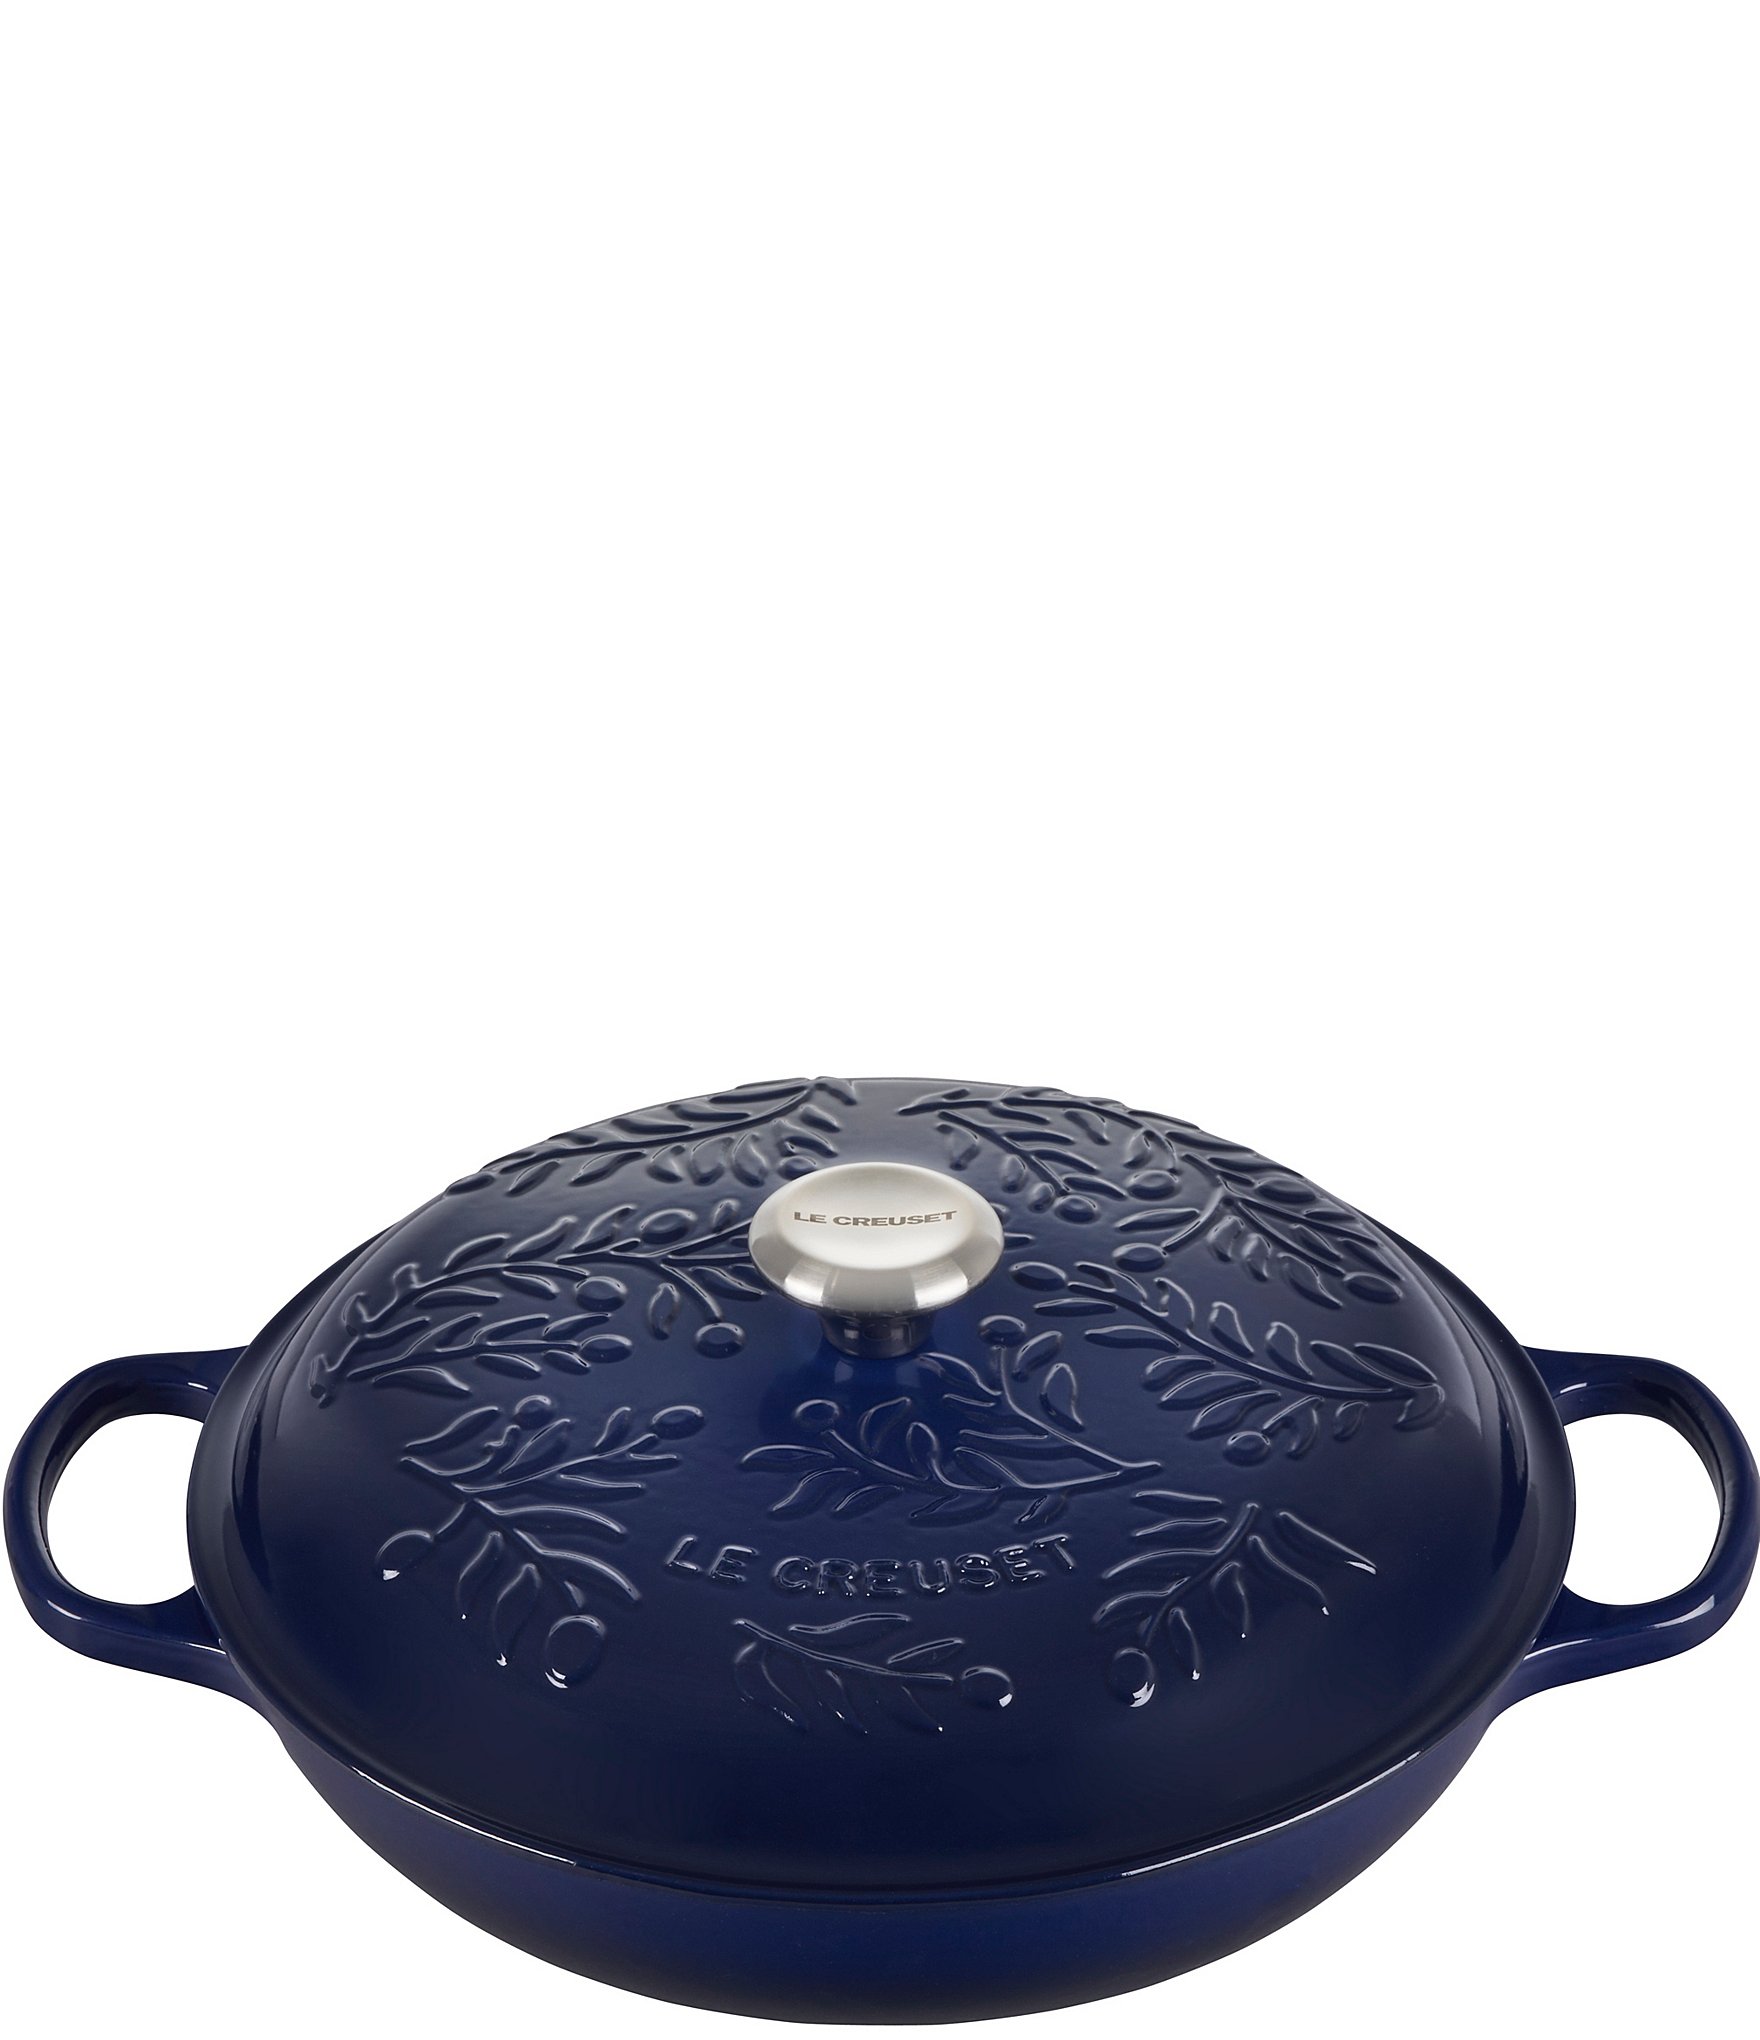 https://dimg.dillards.com/is/image/DillardsZoom/zoom/le-creuset-olive-branch-collection-signature-braiser-with-stainless-steel-knob/00000000_zi_274bf4b4-167f-4c62-a2c4-99688a51e7ff.jpg